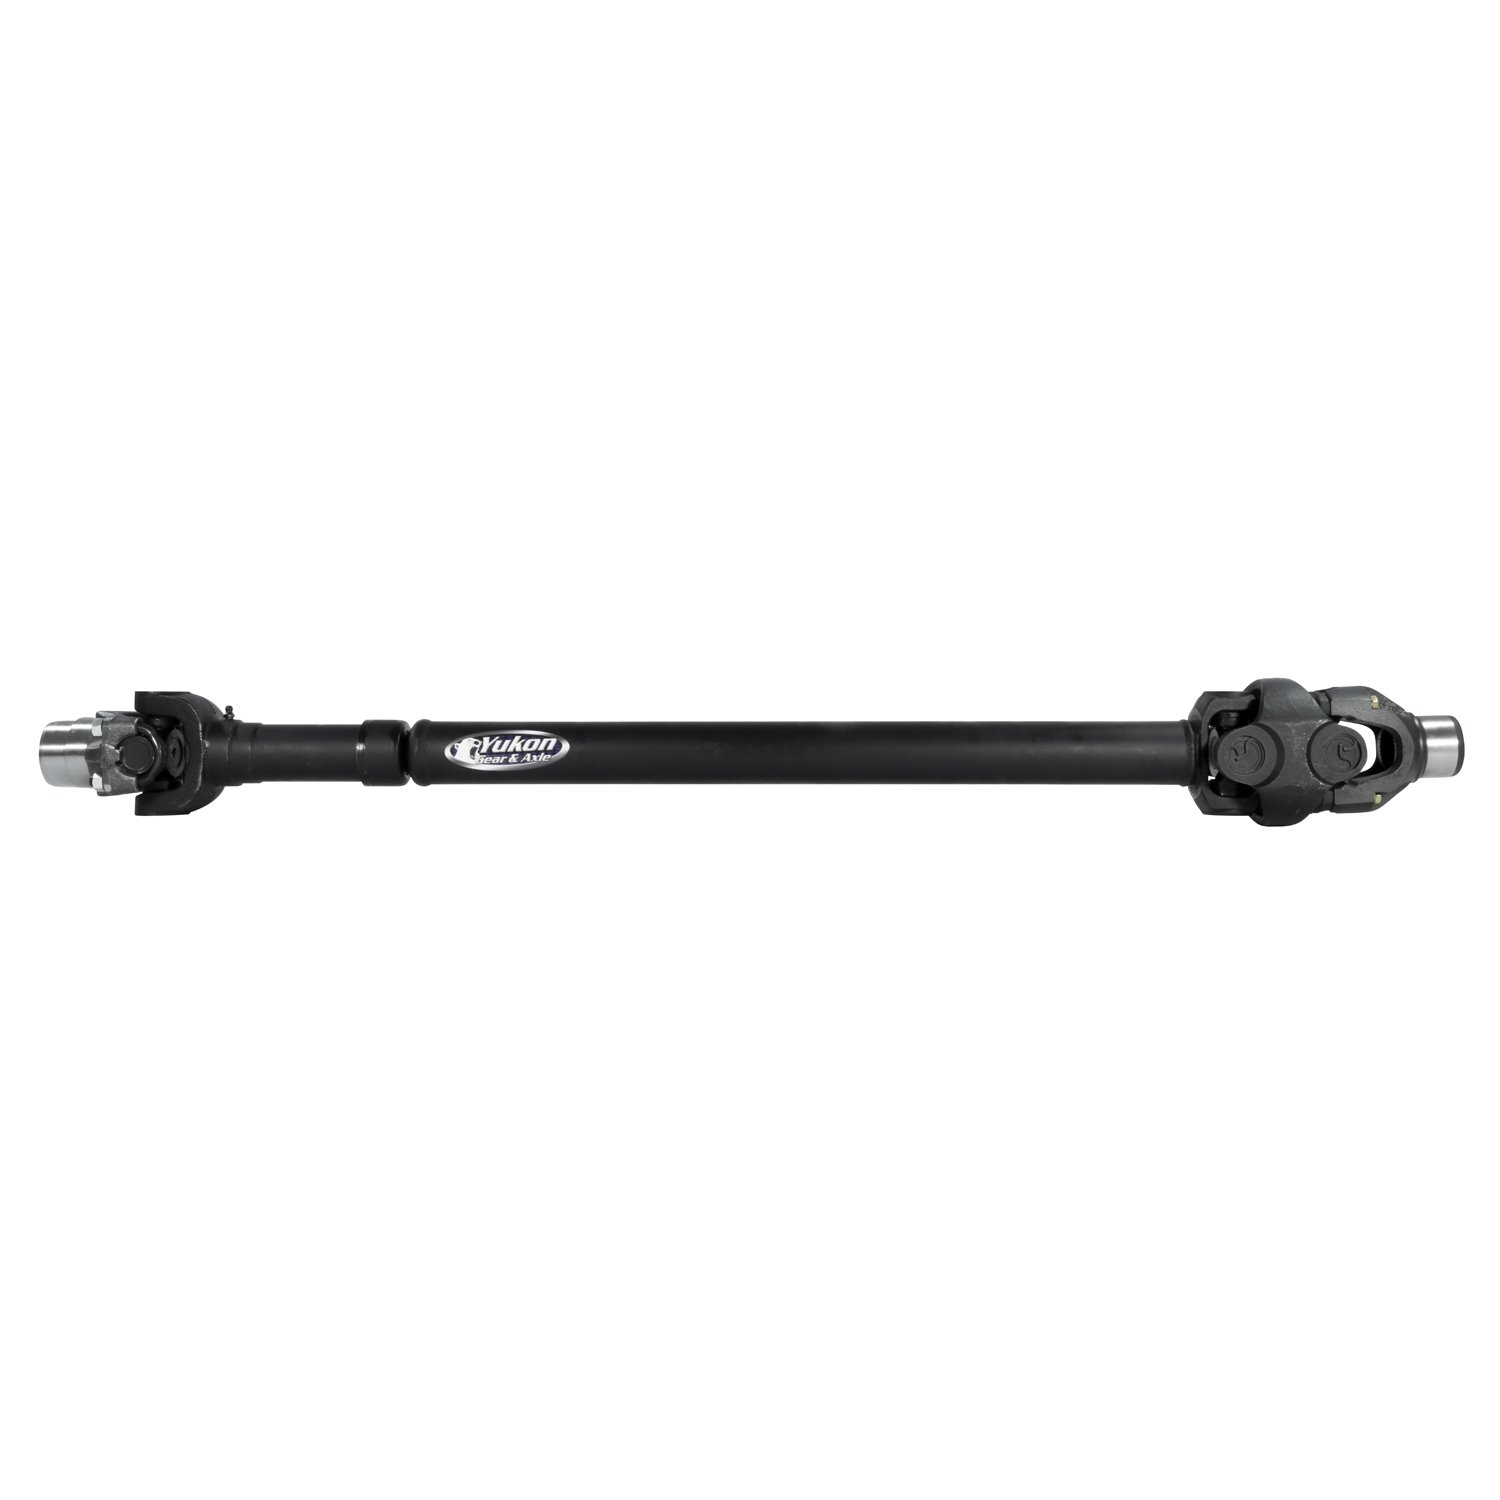 Performance Front Driveshaft Hd For 2018 Jeep Rubicon 4Dr Manual